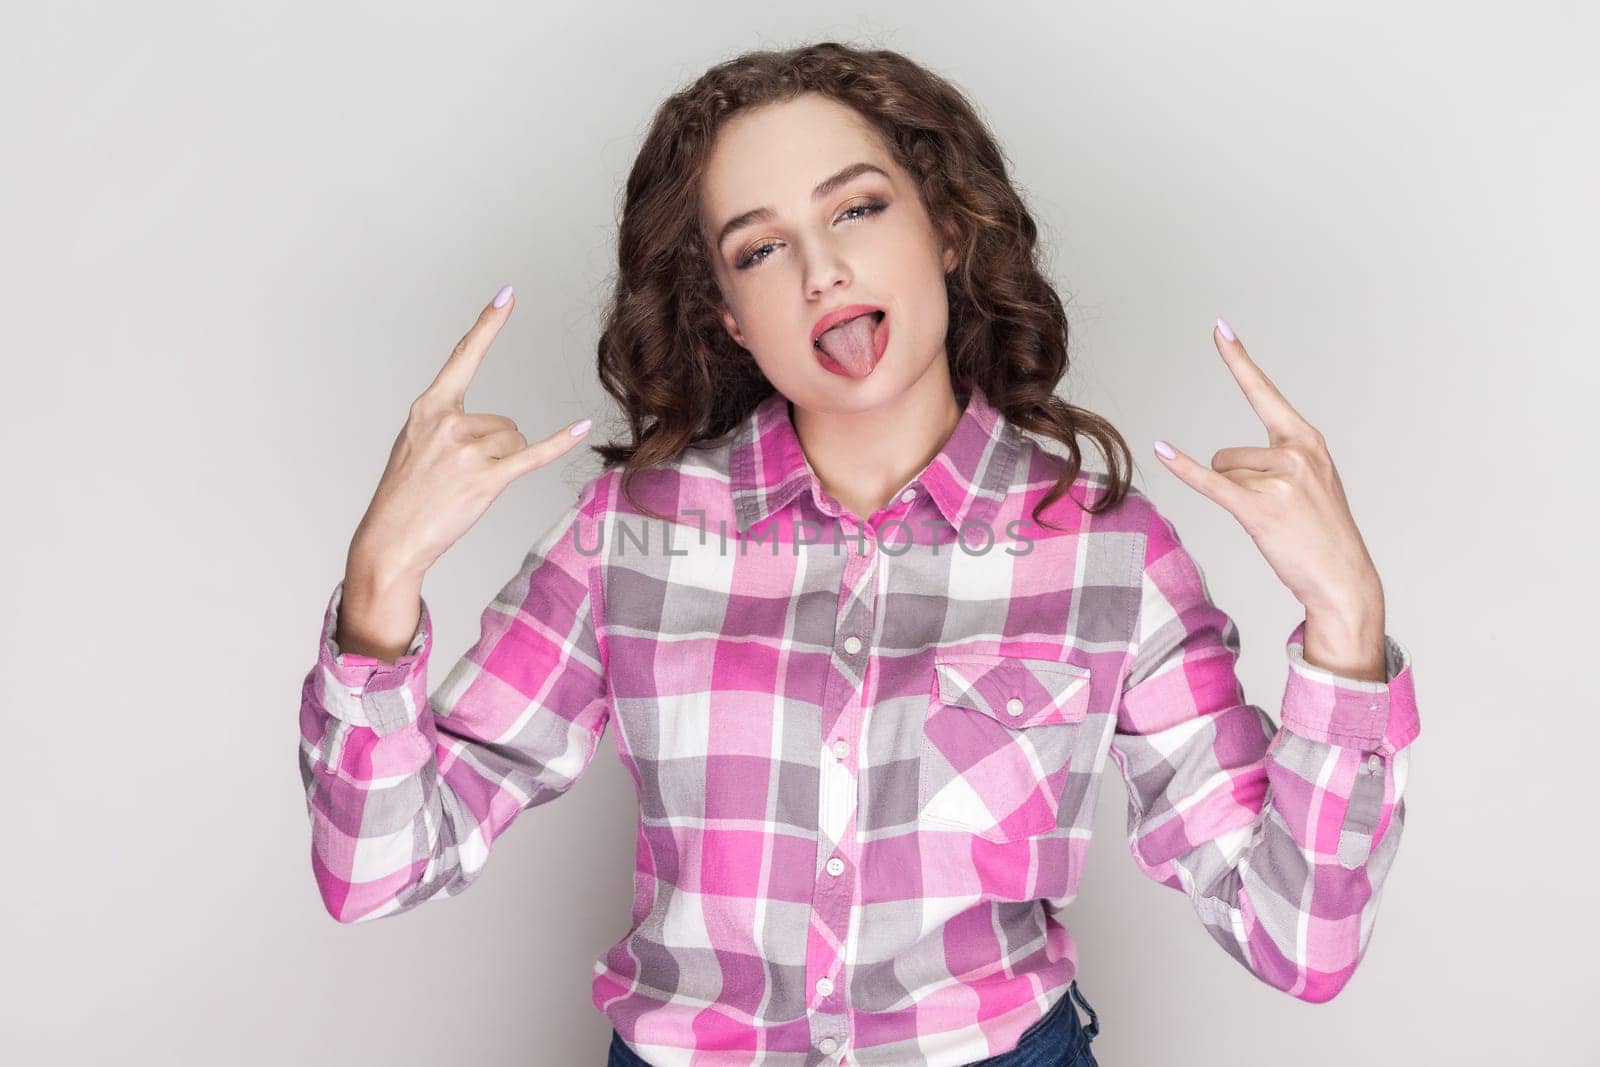 Portrait of energetic young woman with curly hair makes rock n roll gesture, enjoys cool music, showing tongue out, wearing pink checkered shirt. Indoor studio shot isolated on gray background.